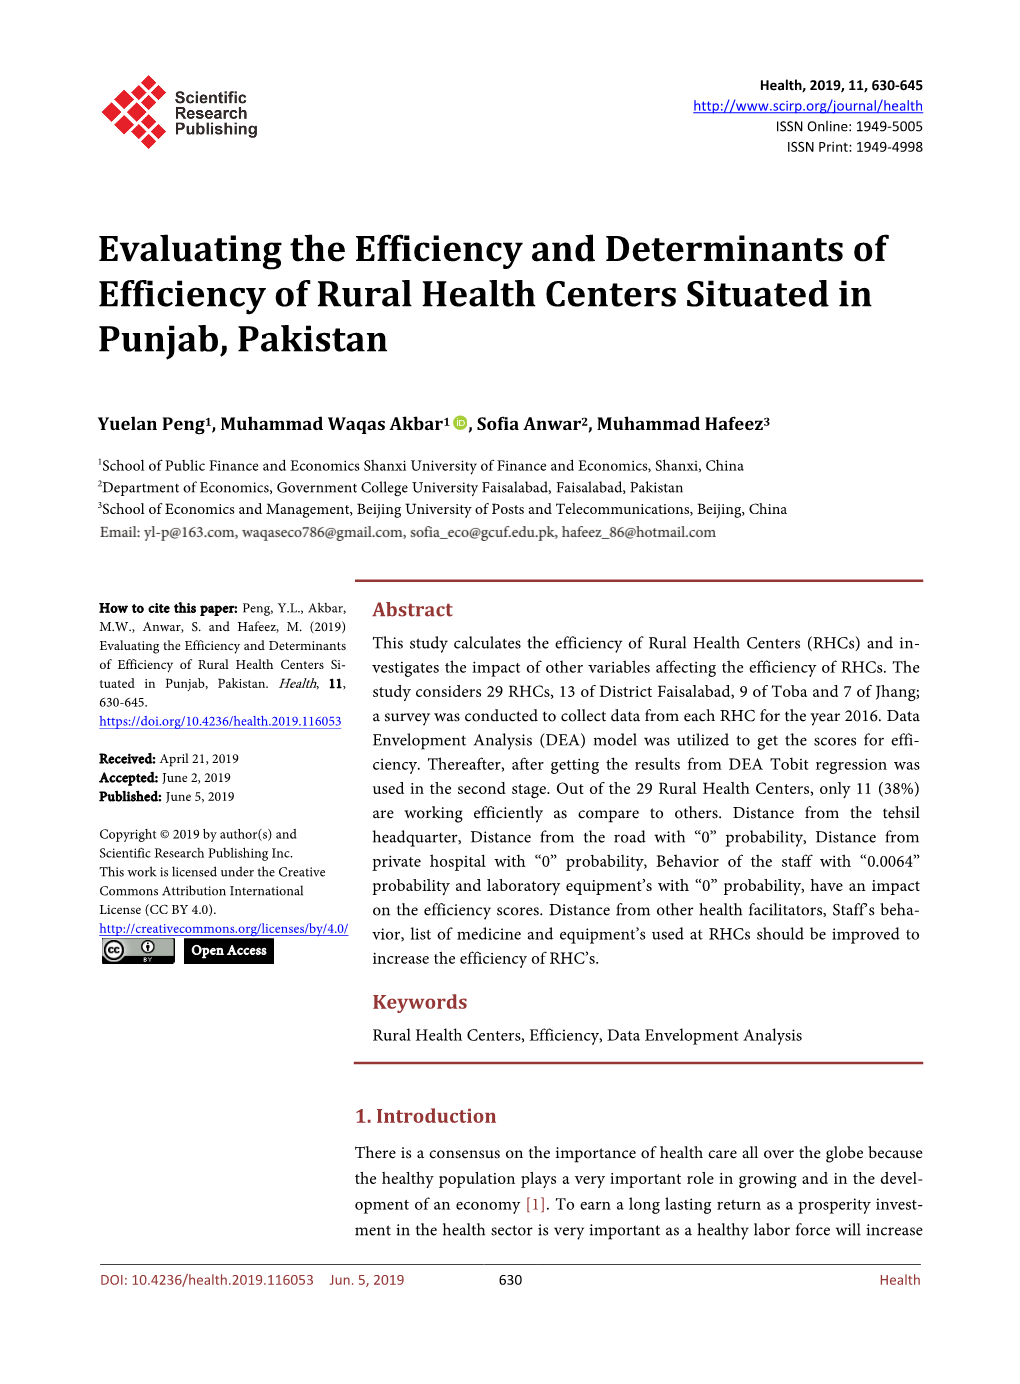 Evaluating the Efficiency and Determinants of Efficiency of Rural Health Centers Situated in Punjab, Pakistan